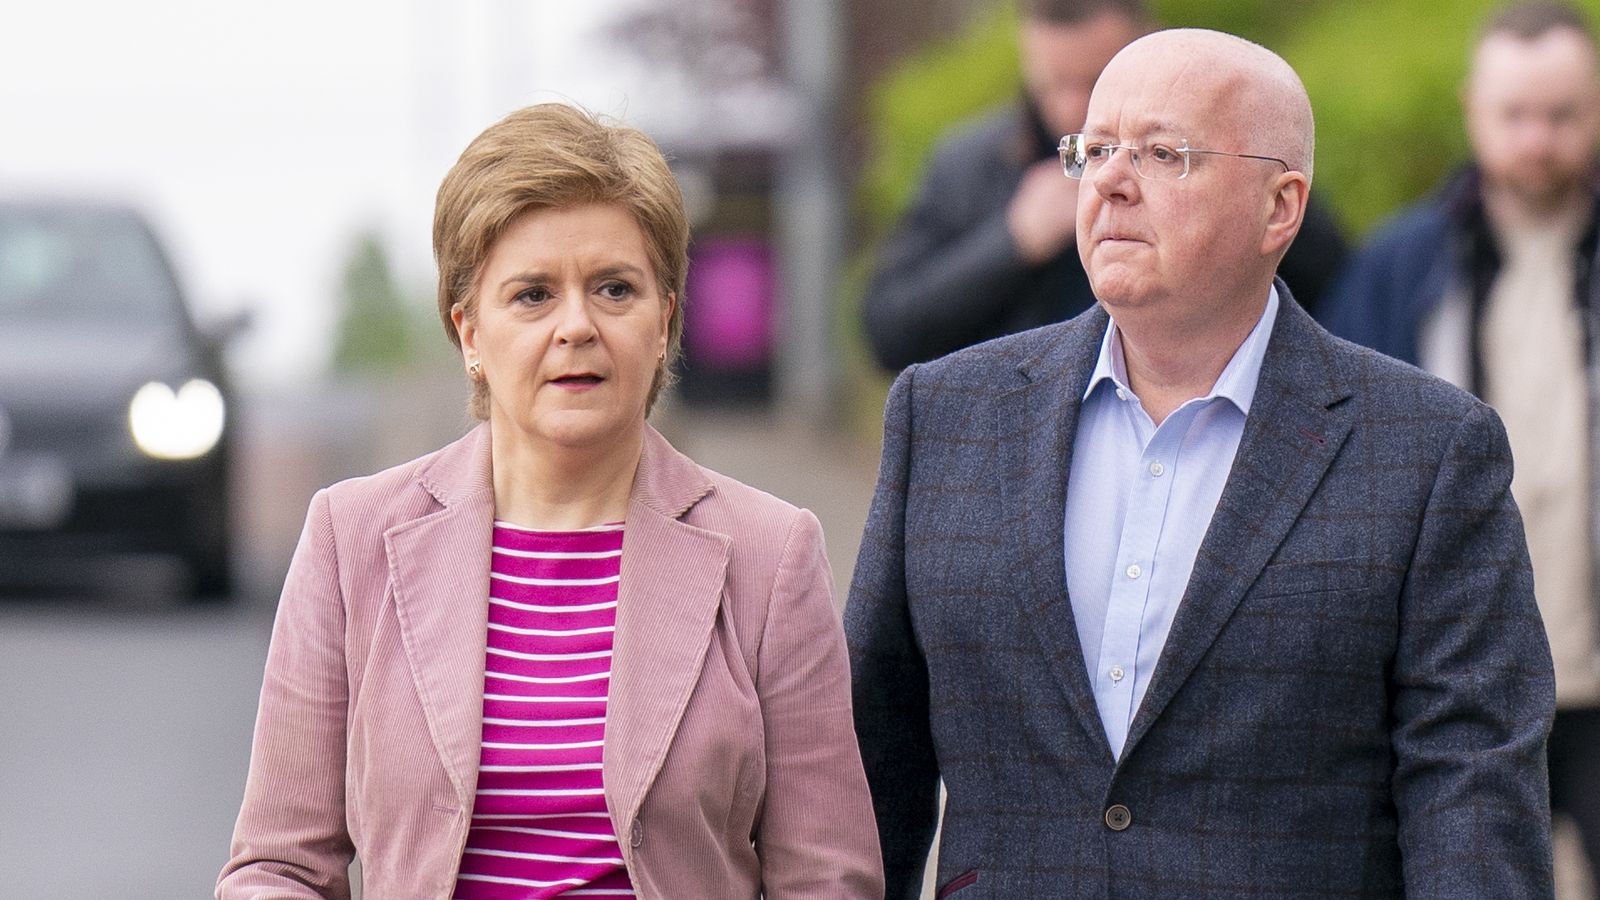 Nicola Sturgeon's husband Peter Murrell charged in connection with embezzlement of funds from SNP